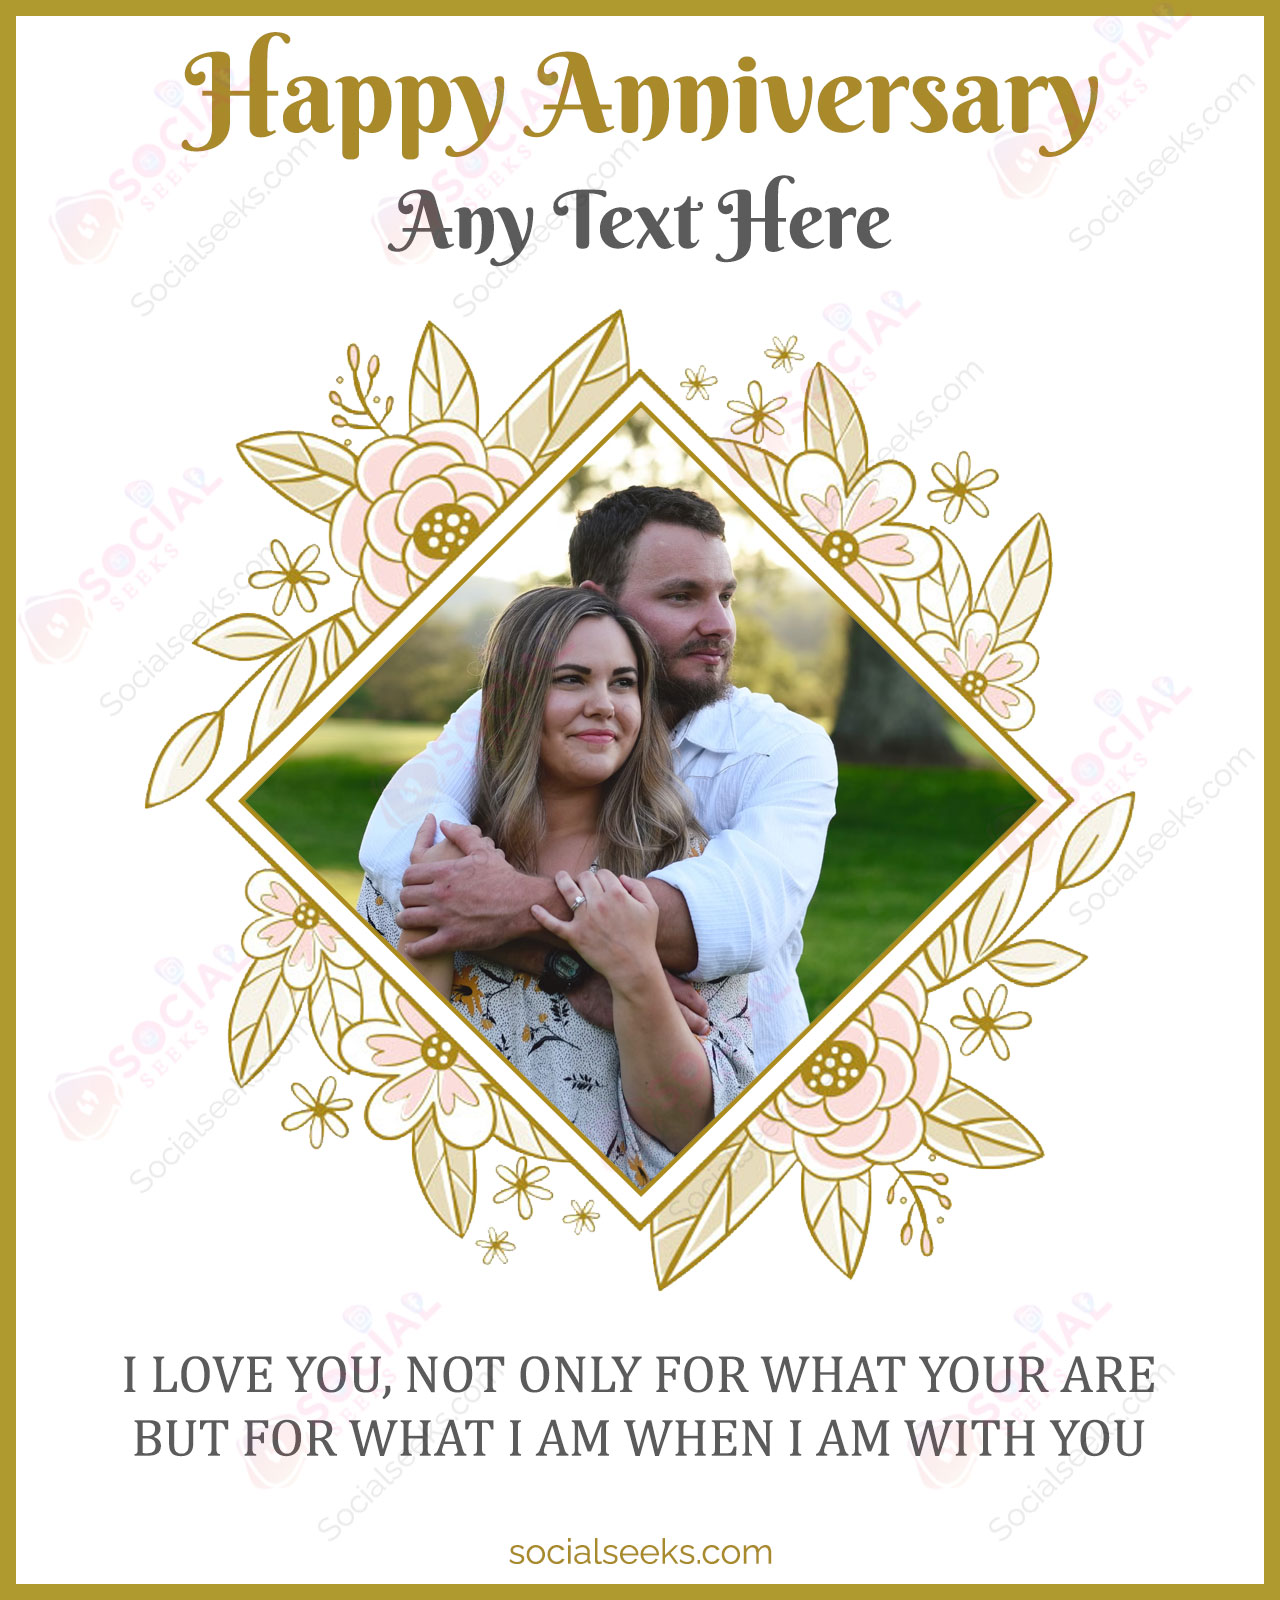 Personalized Anniversary Photo frame